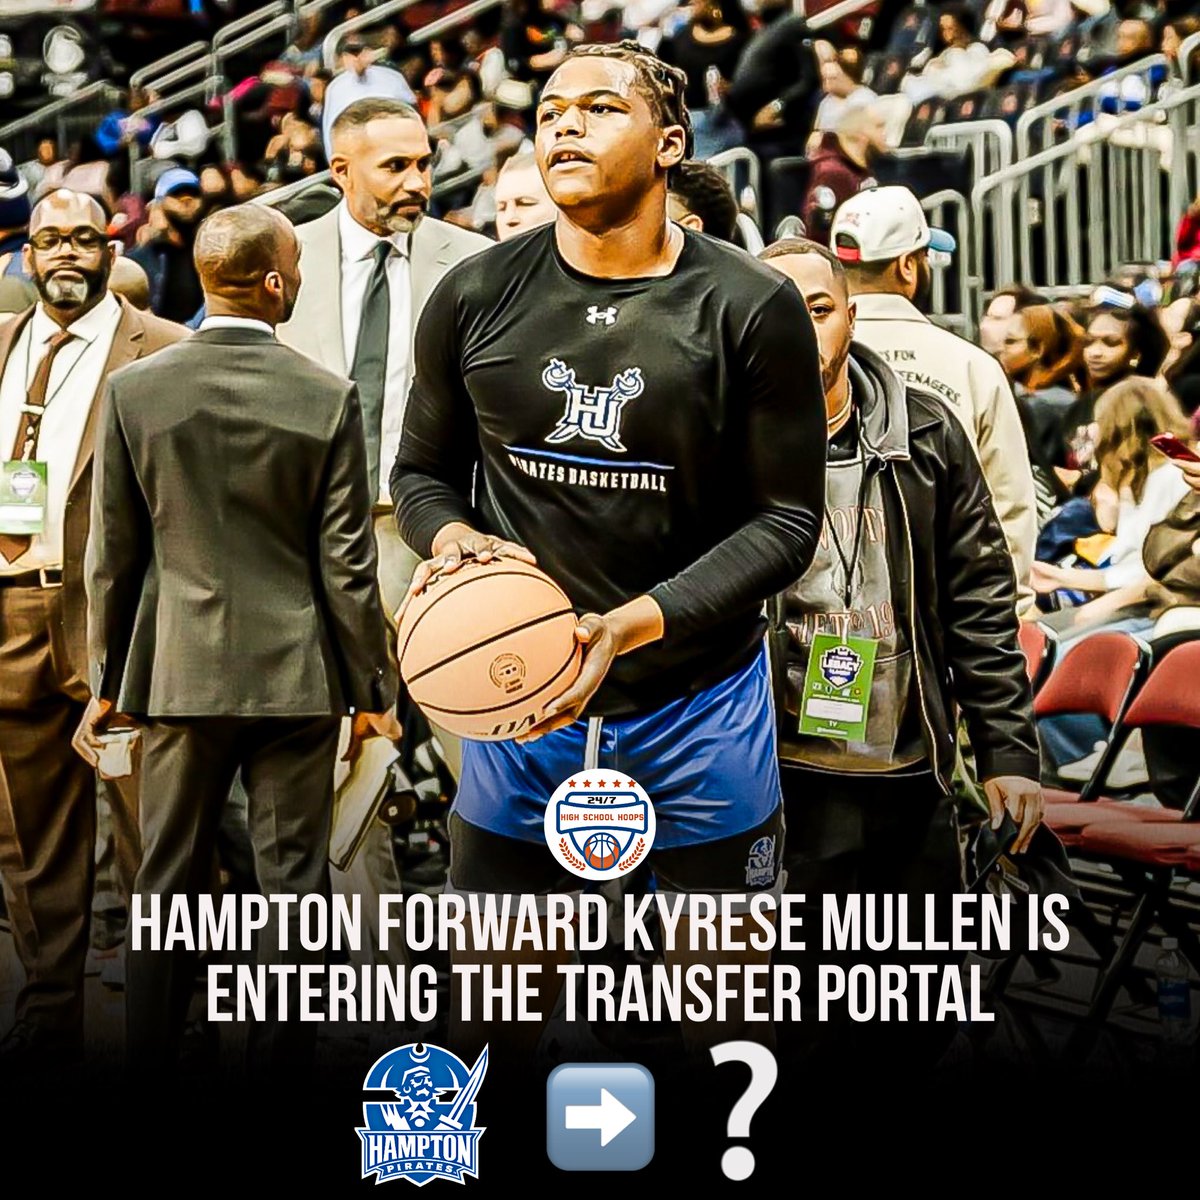 NEWS: Hampton forward Kyrese Mullen is entering the transfer portal, a source tells me. Mullen, as a sophomore, was the teams leading scorer and rebounder in his second season at Hampton. He averaged 14.8PPG, 8.4RPG and 1.5APG this season. Native of Norfolk, Virginia.